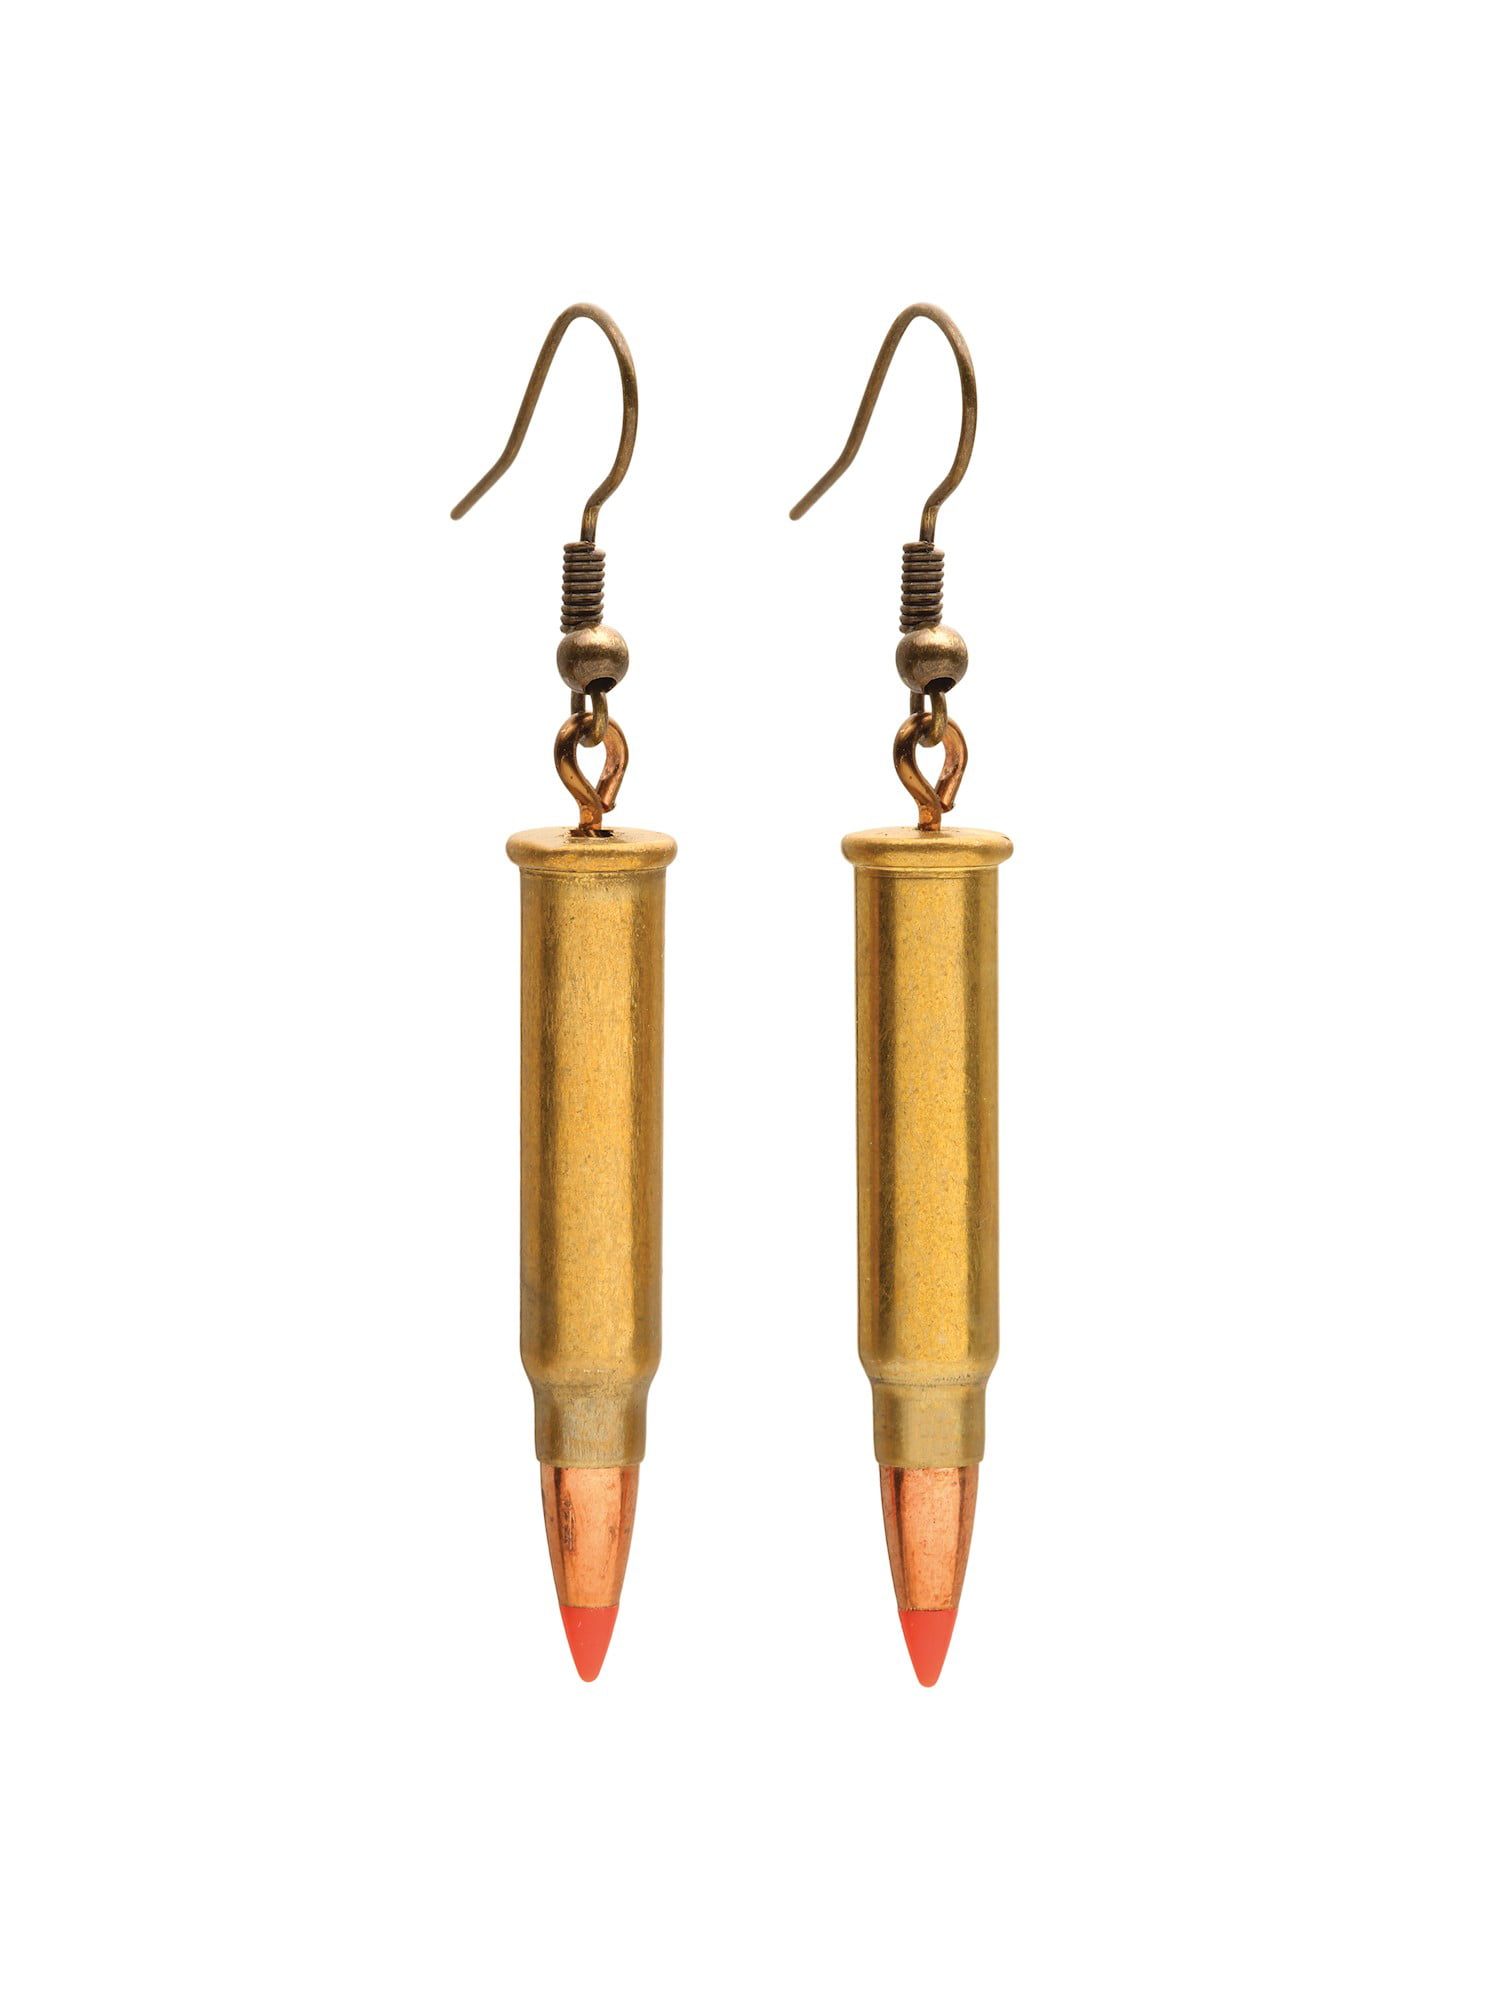 Pretty Hunter 9mm Earrings with Bullet Shell Casings and Crystals Handmade 